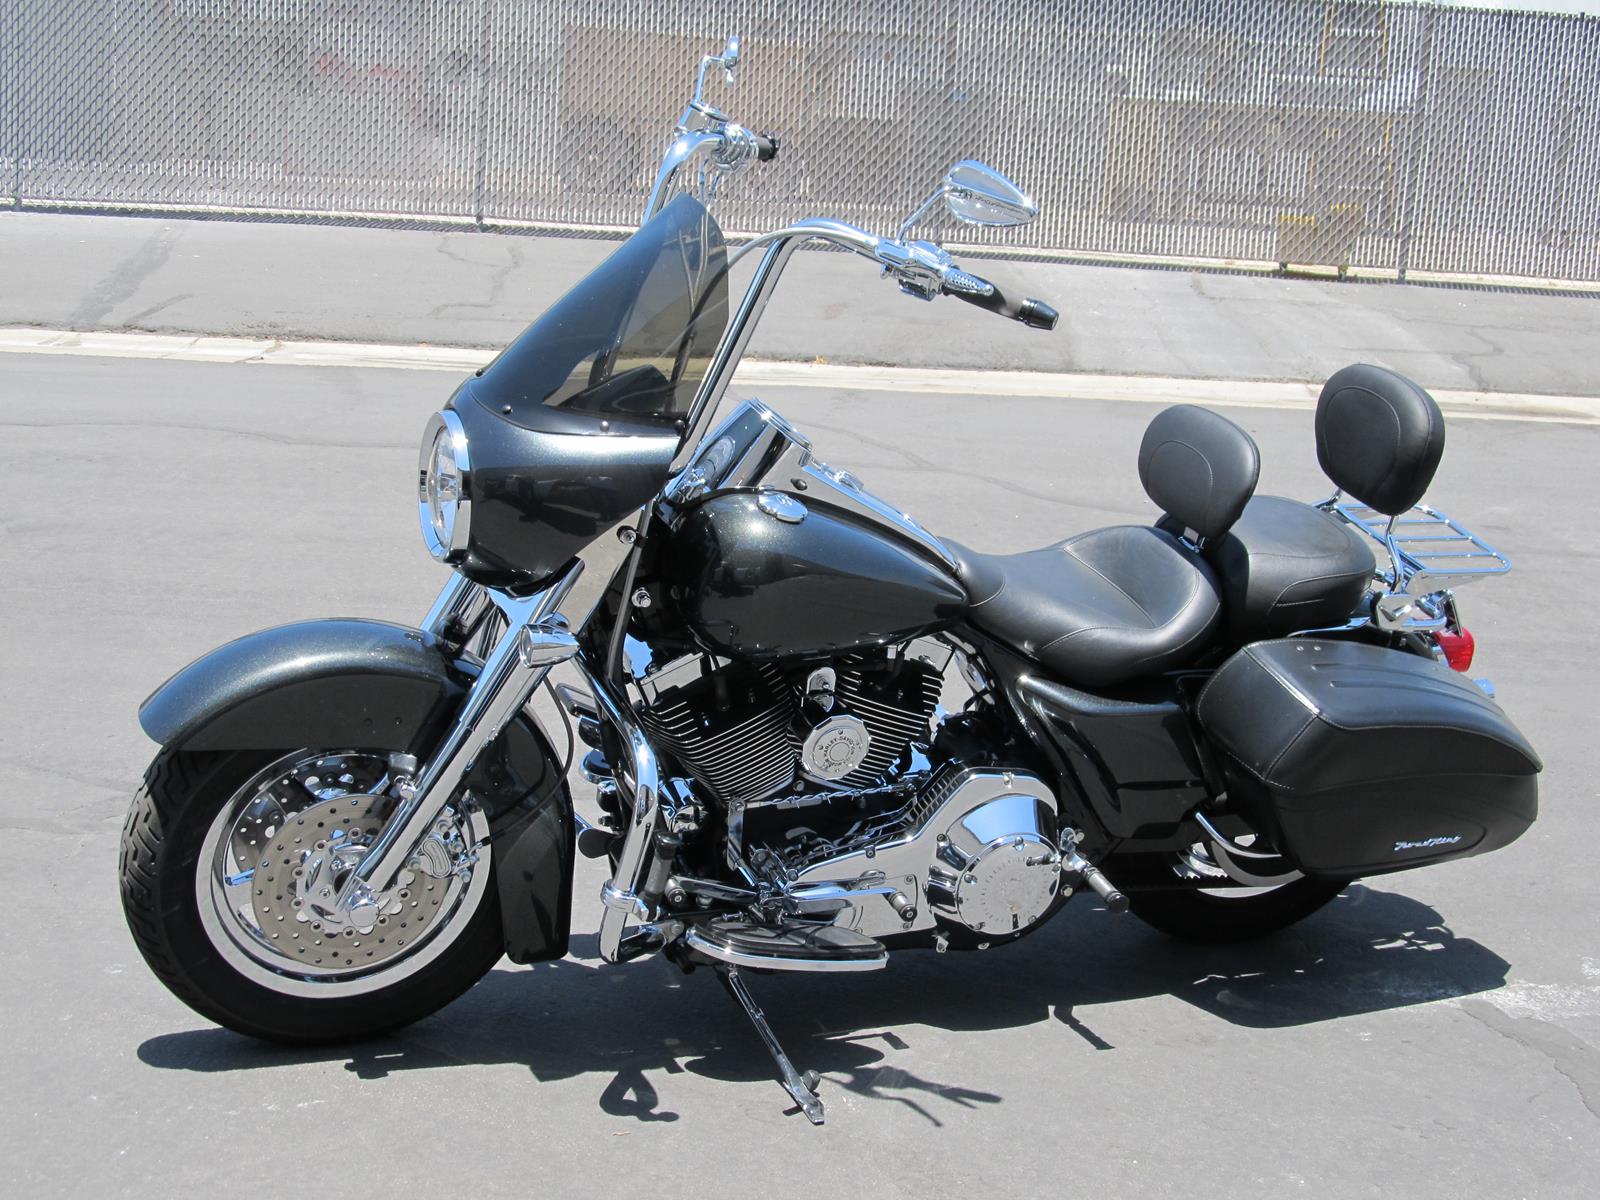 Road King No scallops 9 inch hole tall windshield.